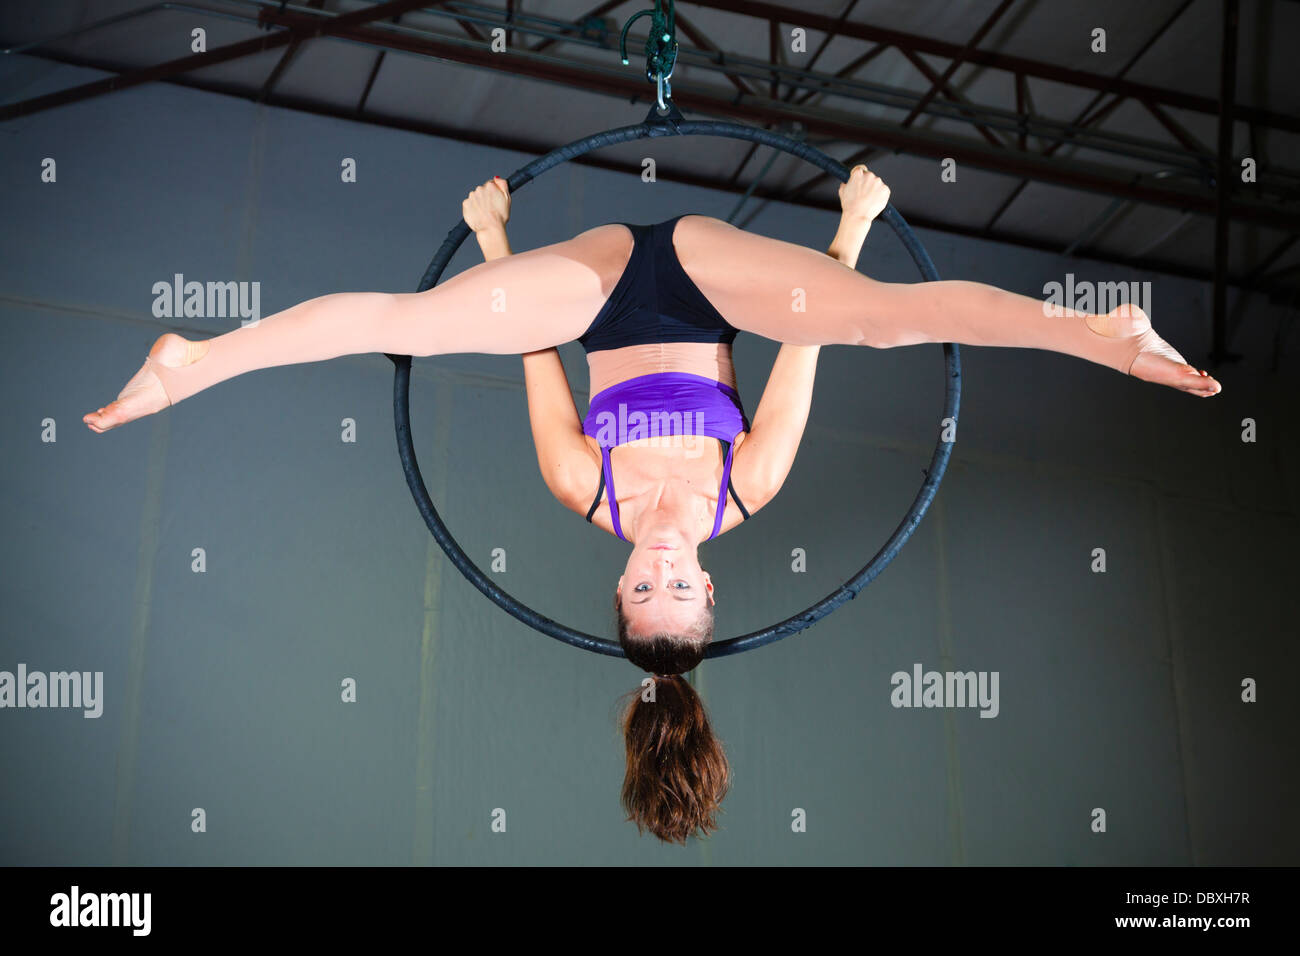 Gymnast performing aerial exercises Stock Photo